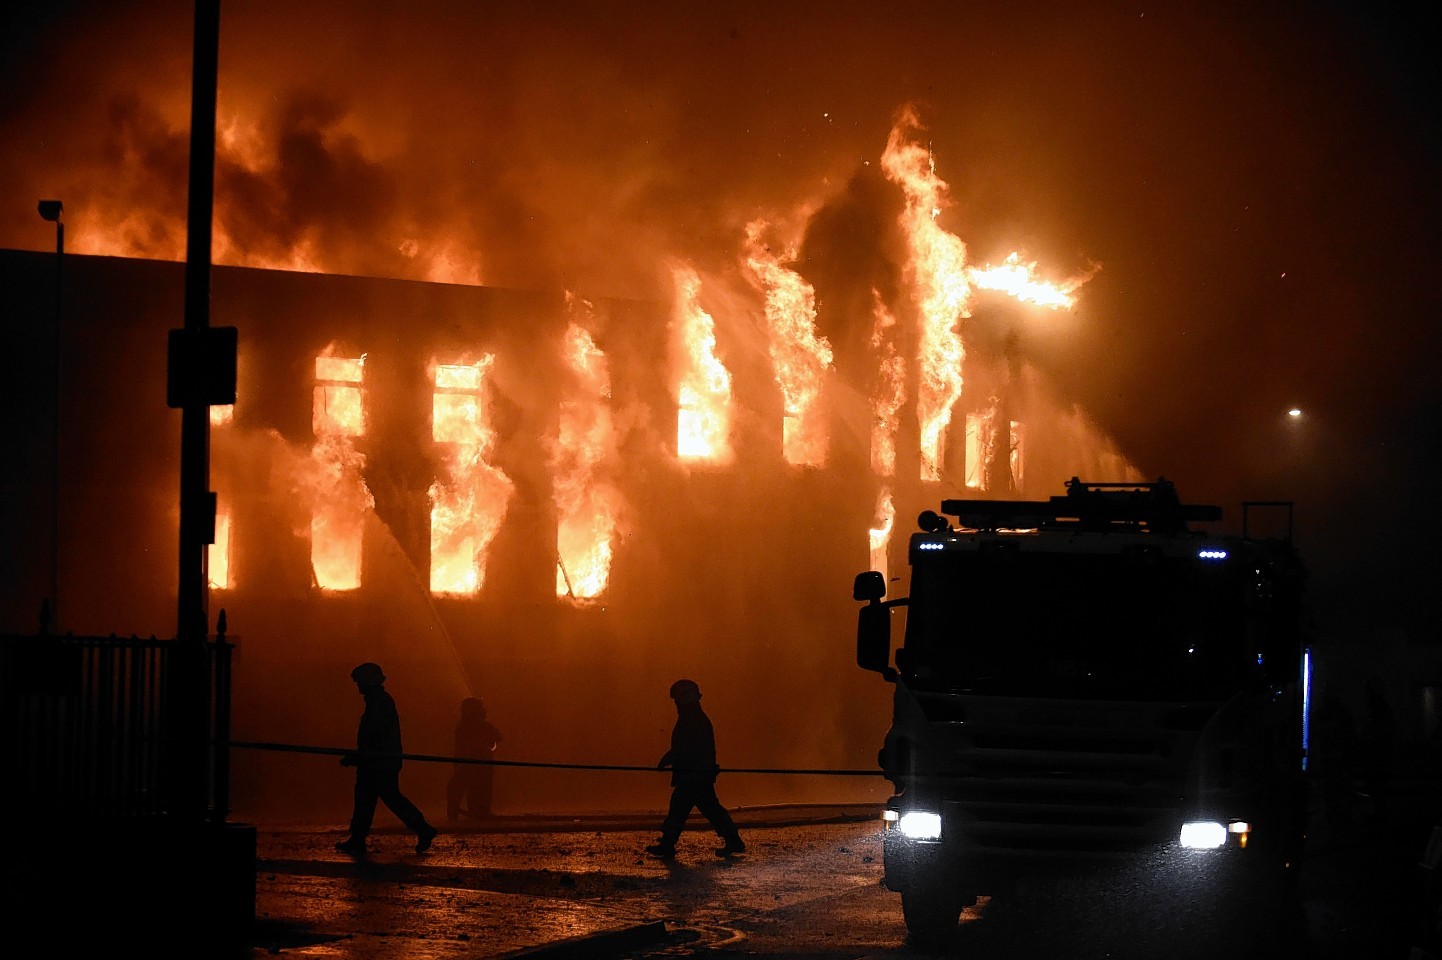 A scene from the fire last night as it tore through two buildings